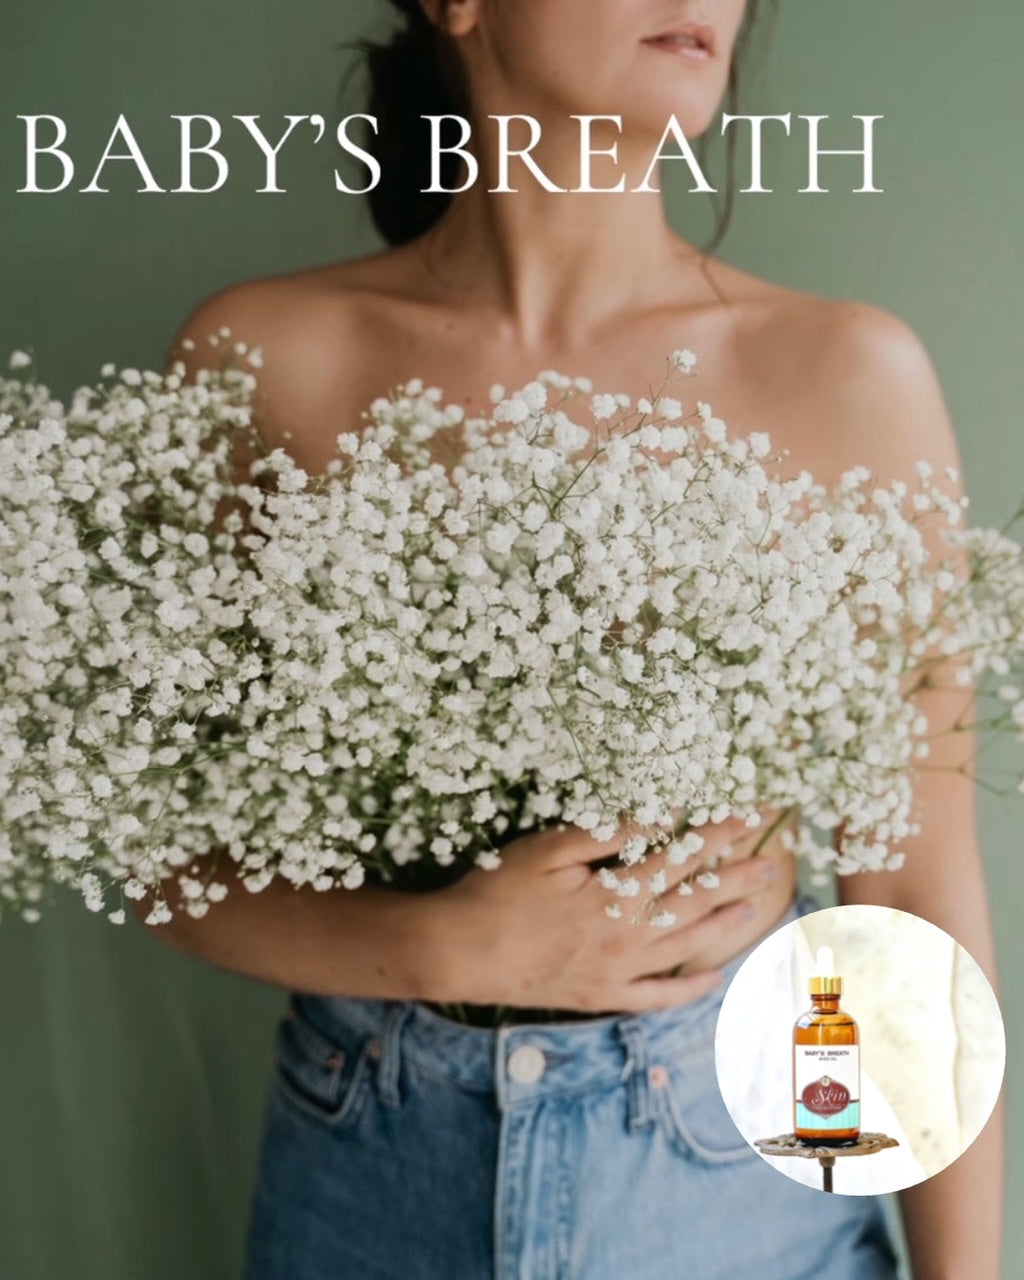 BABY'S BREATH Scented Shea Oil - in 4 oz bottles, highly moisturizing